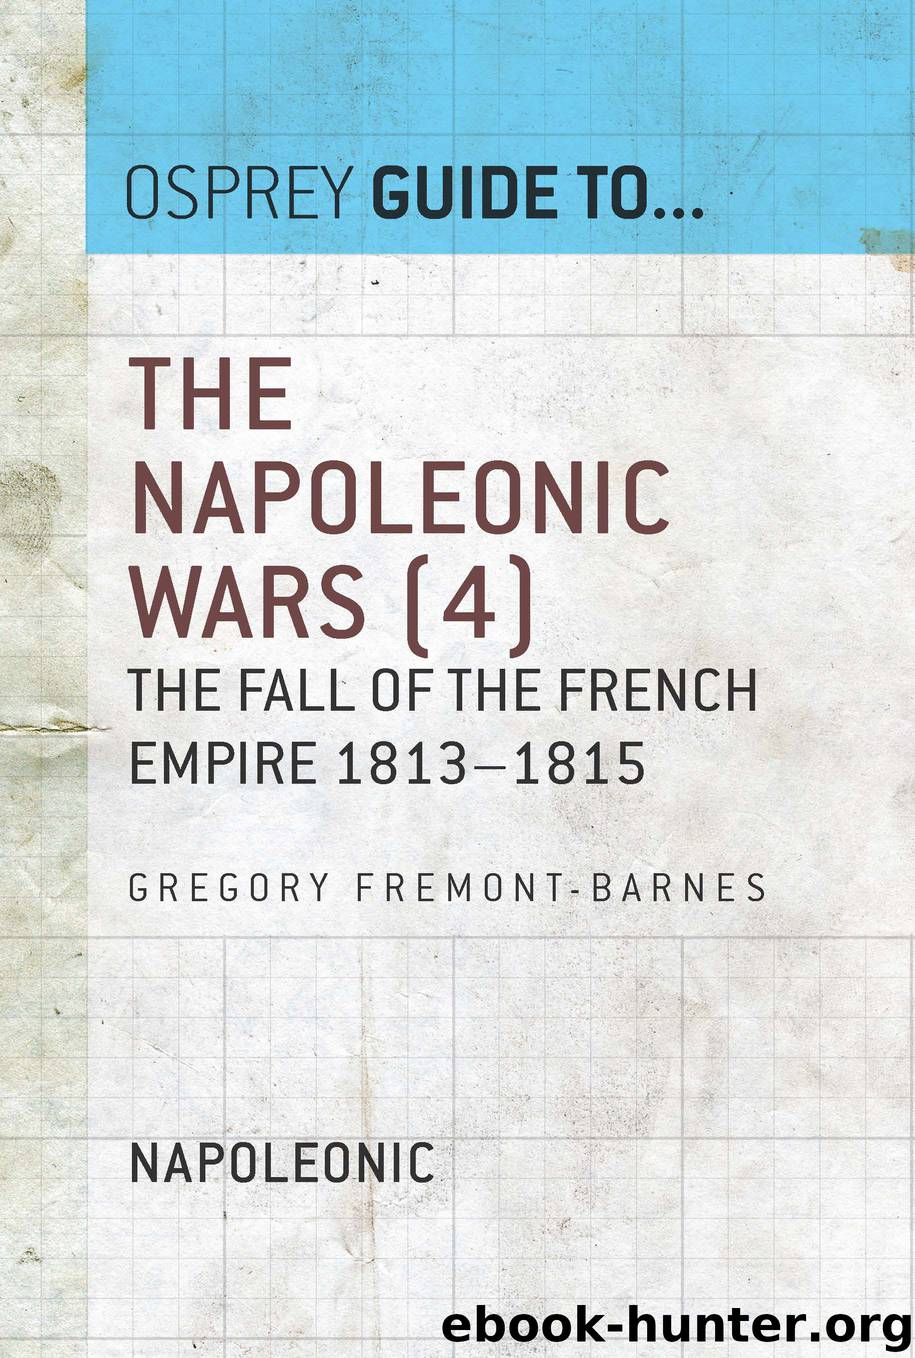 The Napoleonic Wars, Volume 4 by Gregory Fremont-Barnes